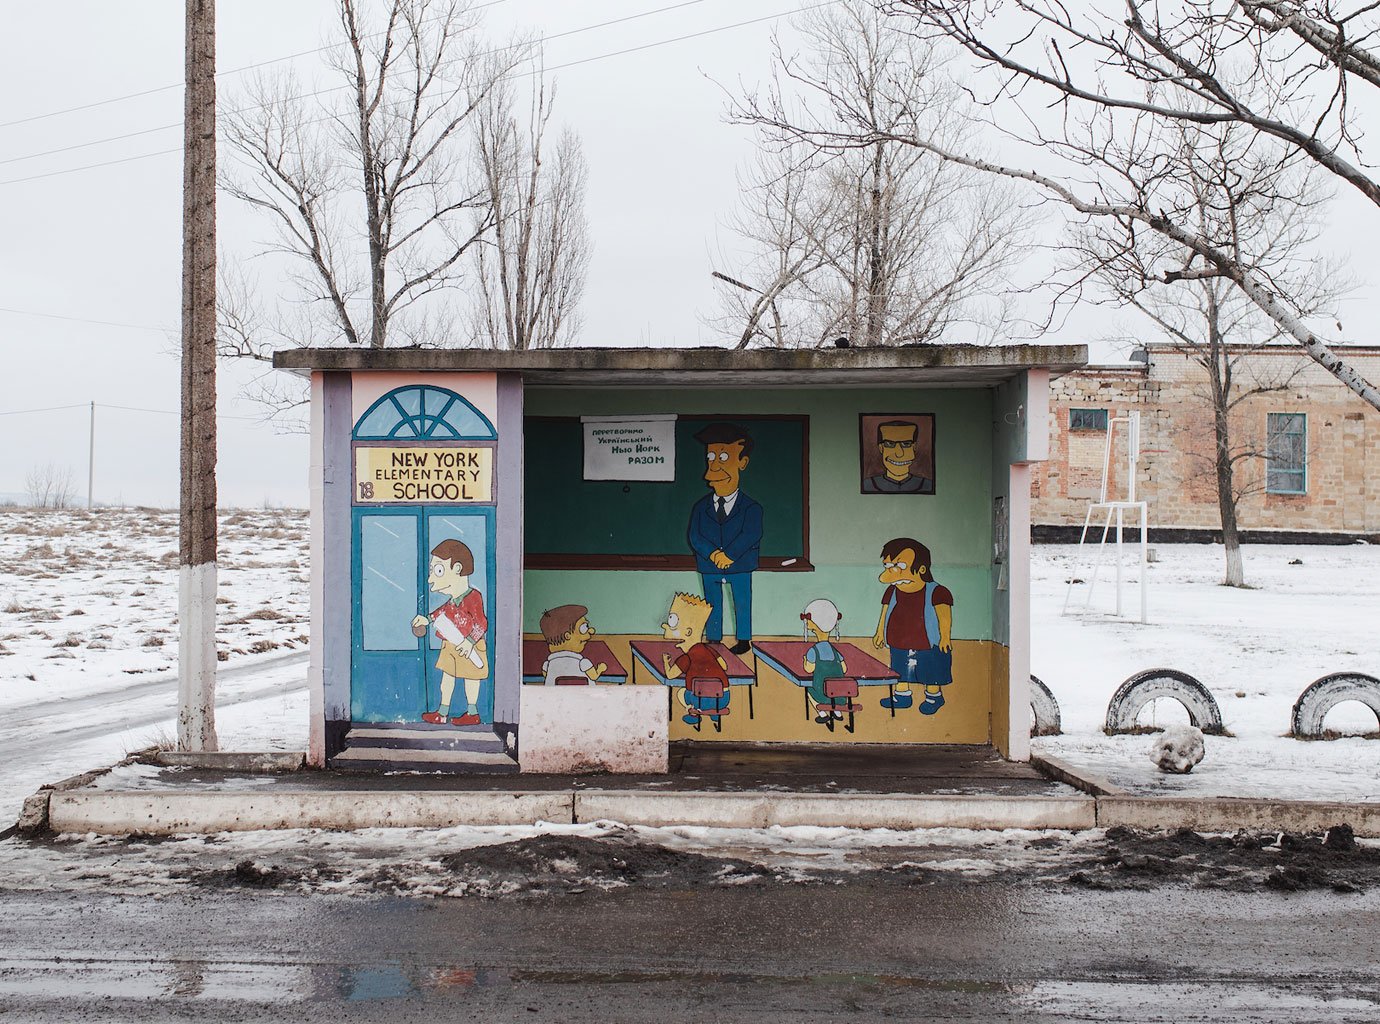 The other New York: the small Ukrainian town fighting to recover its historic name